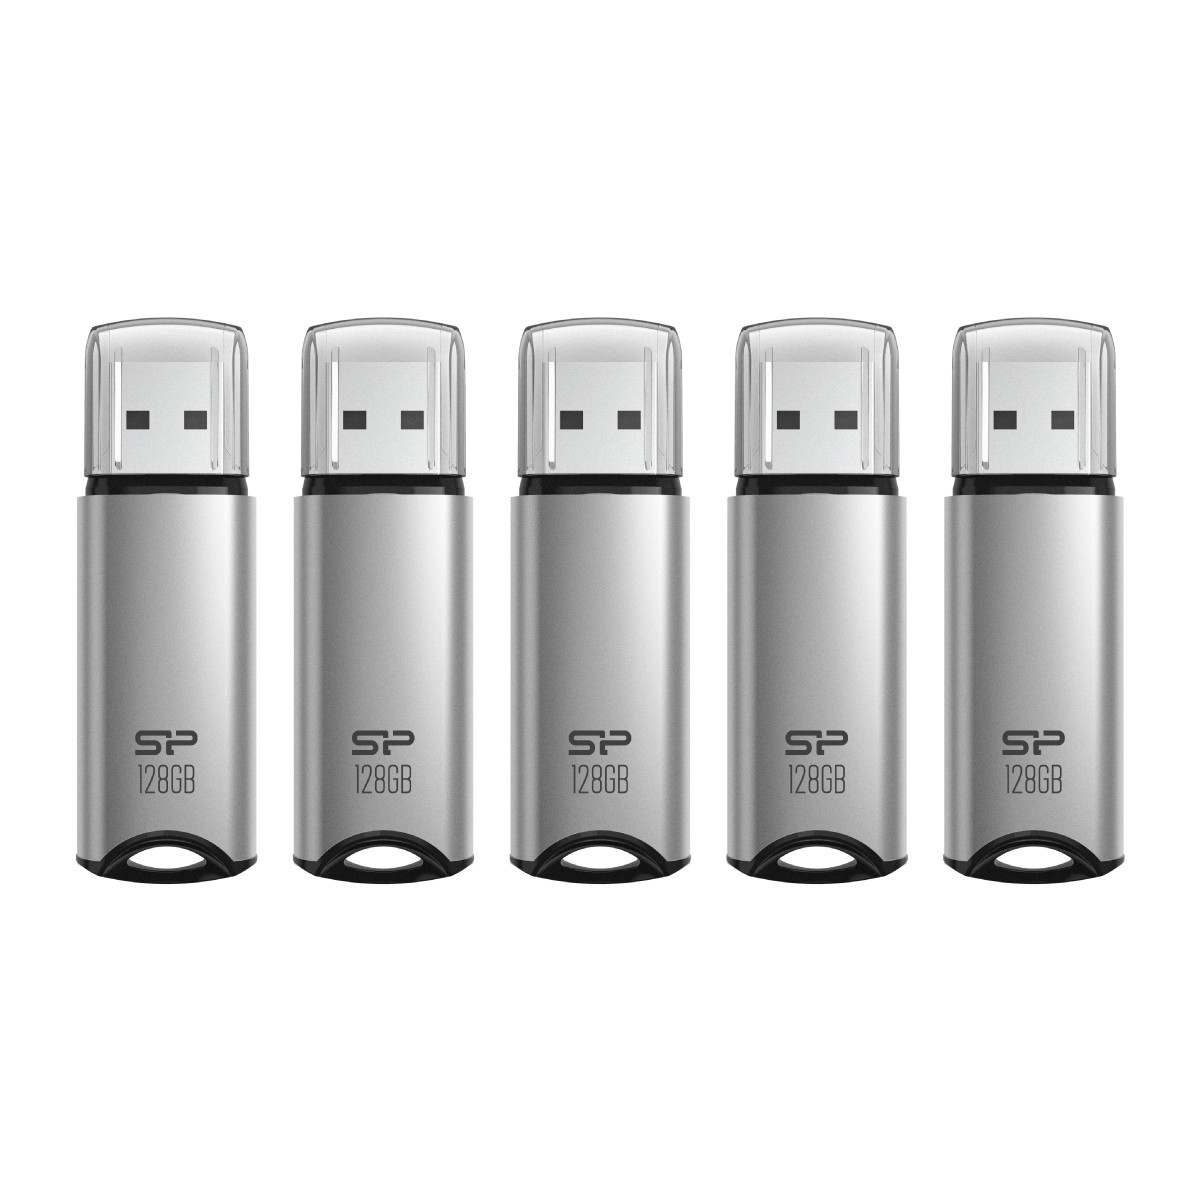 Silicon Power 128GB Marvel M02 USB 3.0 Flash Drive - Silver (5-Pack)